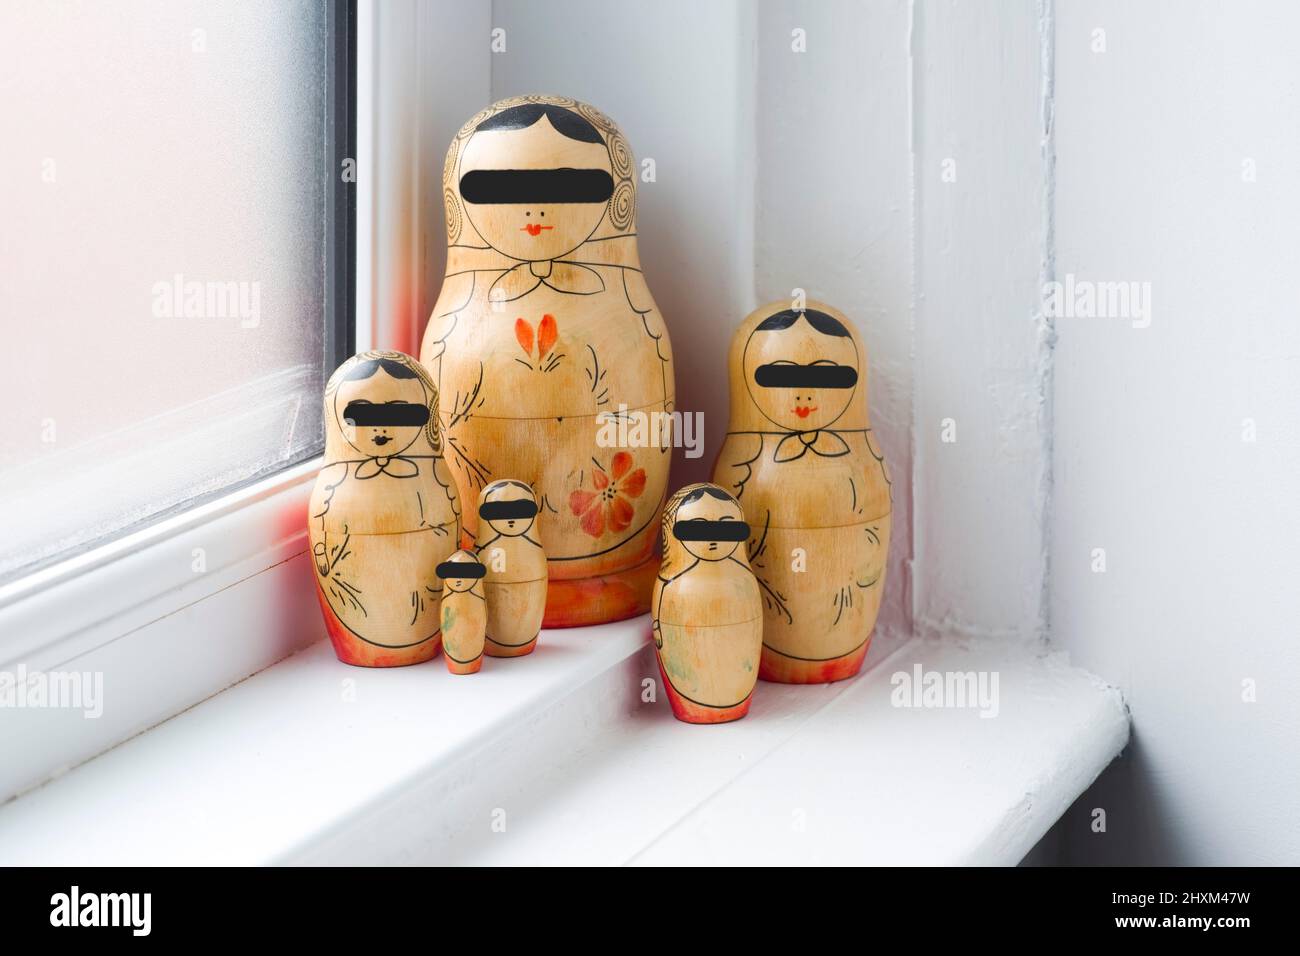 Family of Russian Dolls in a grouping on a window sill with their eyes blacked out so they cannot see Stock Photo